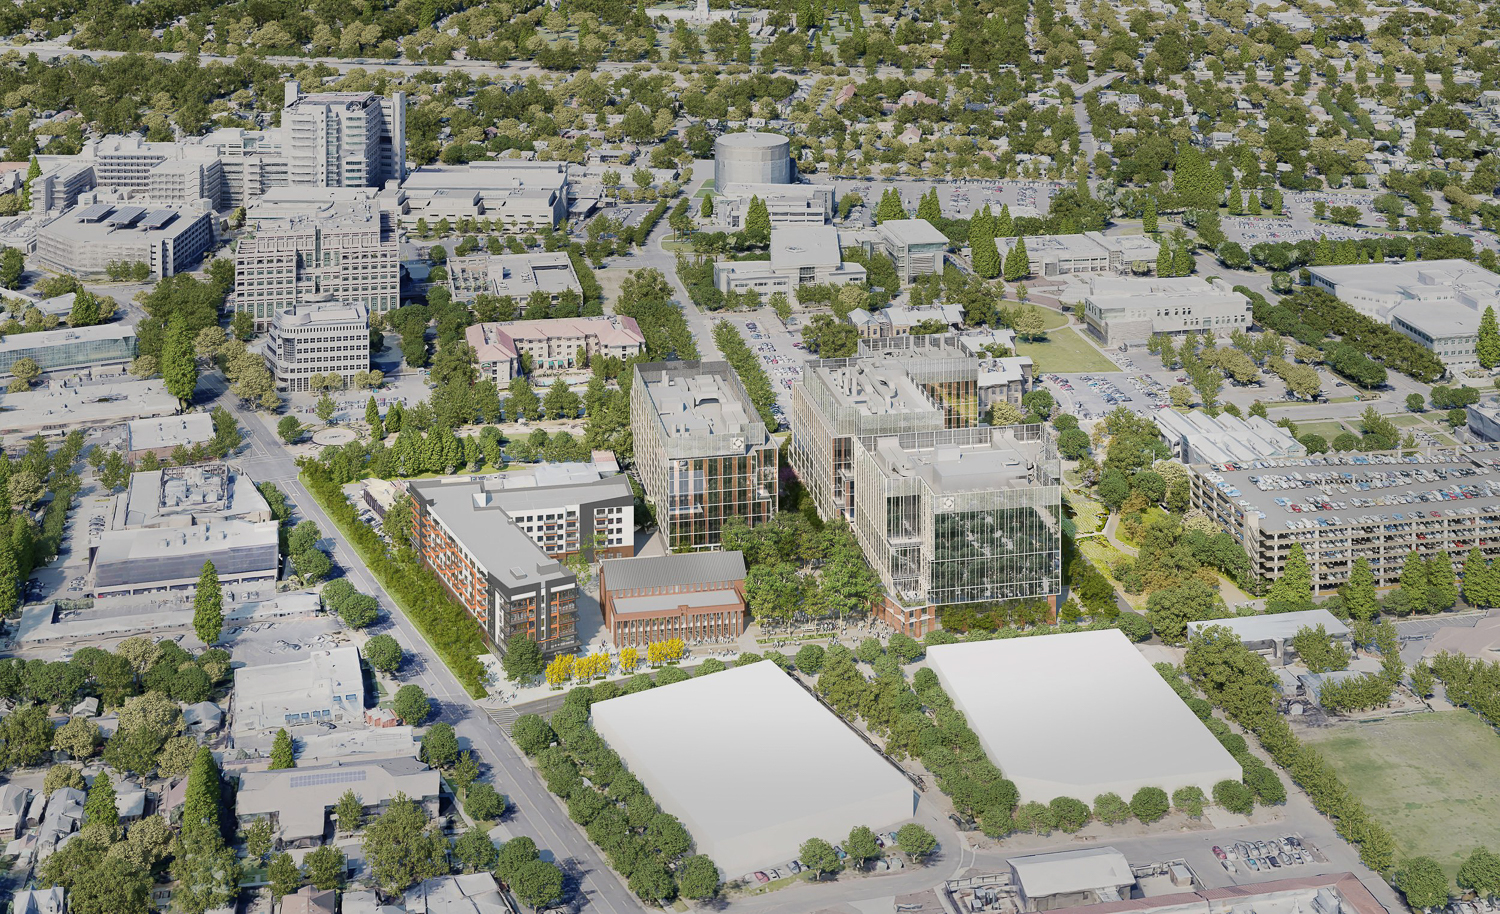 Aggie Square aerial view, rendering by ZGF Architects